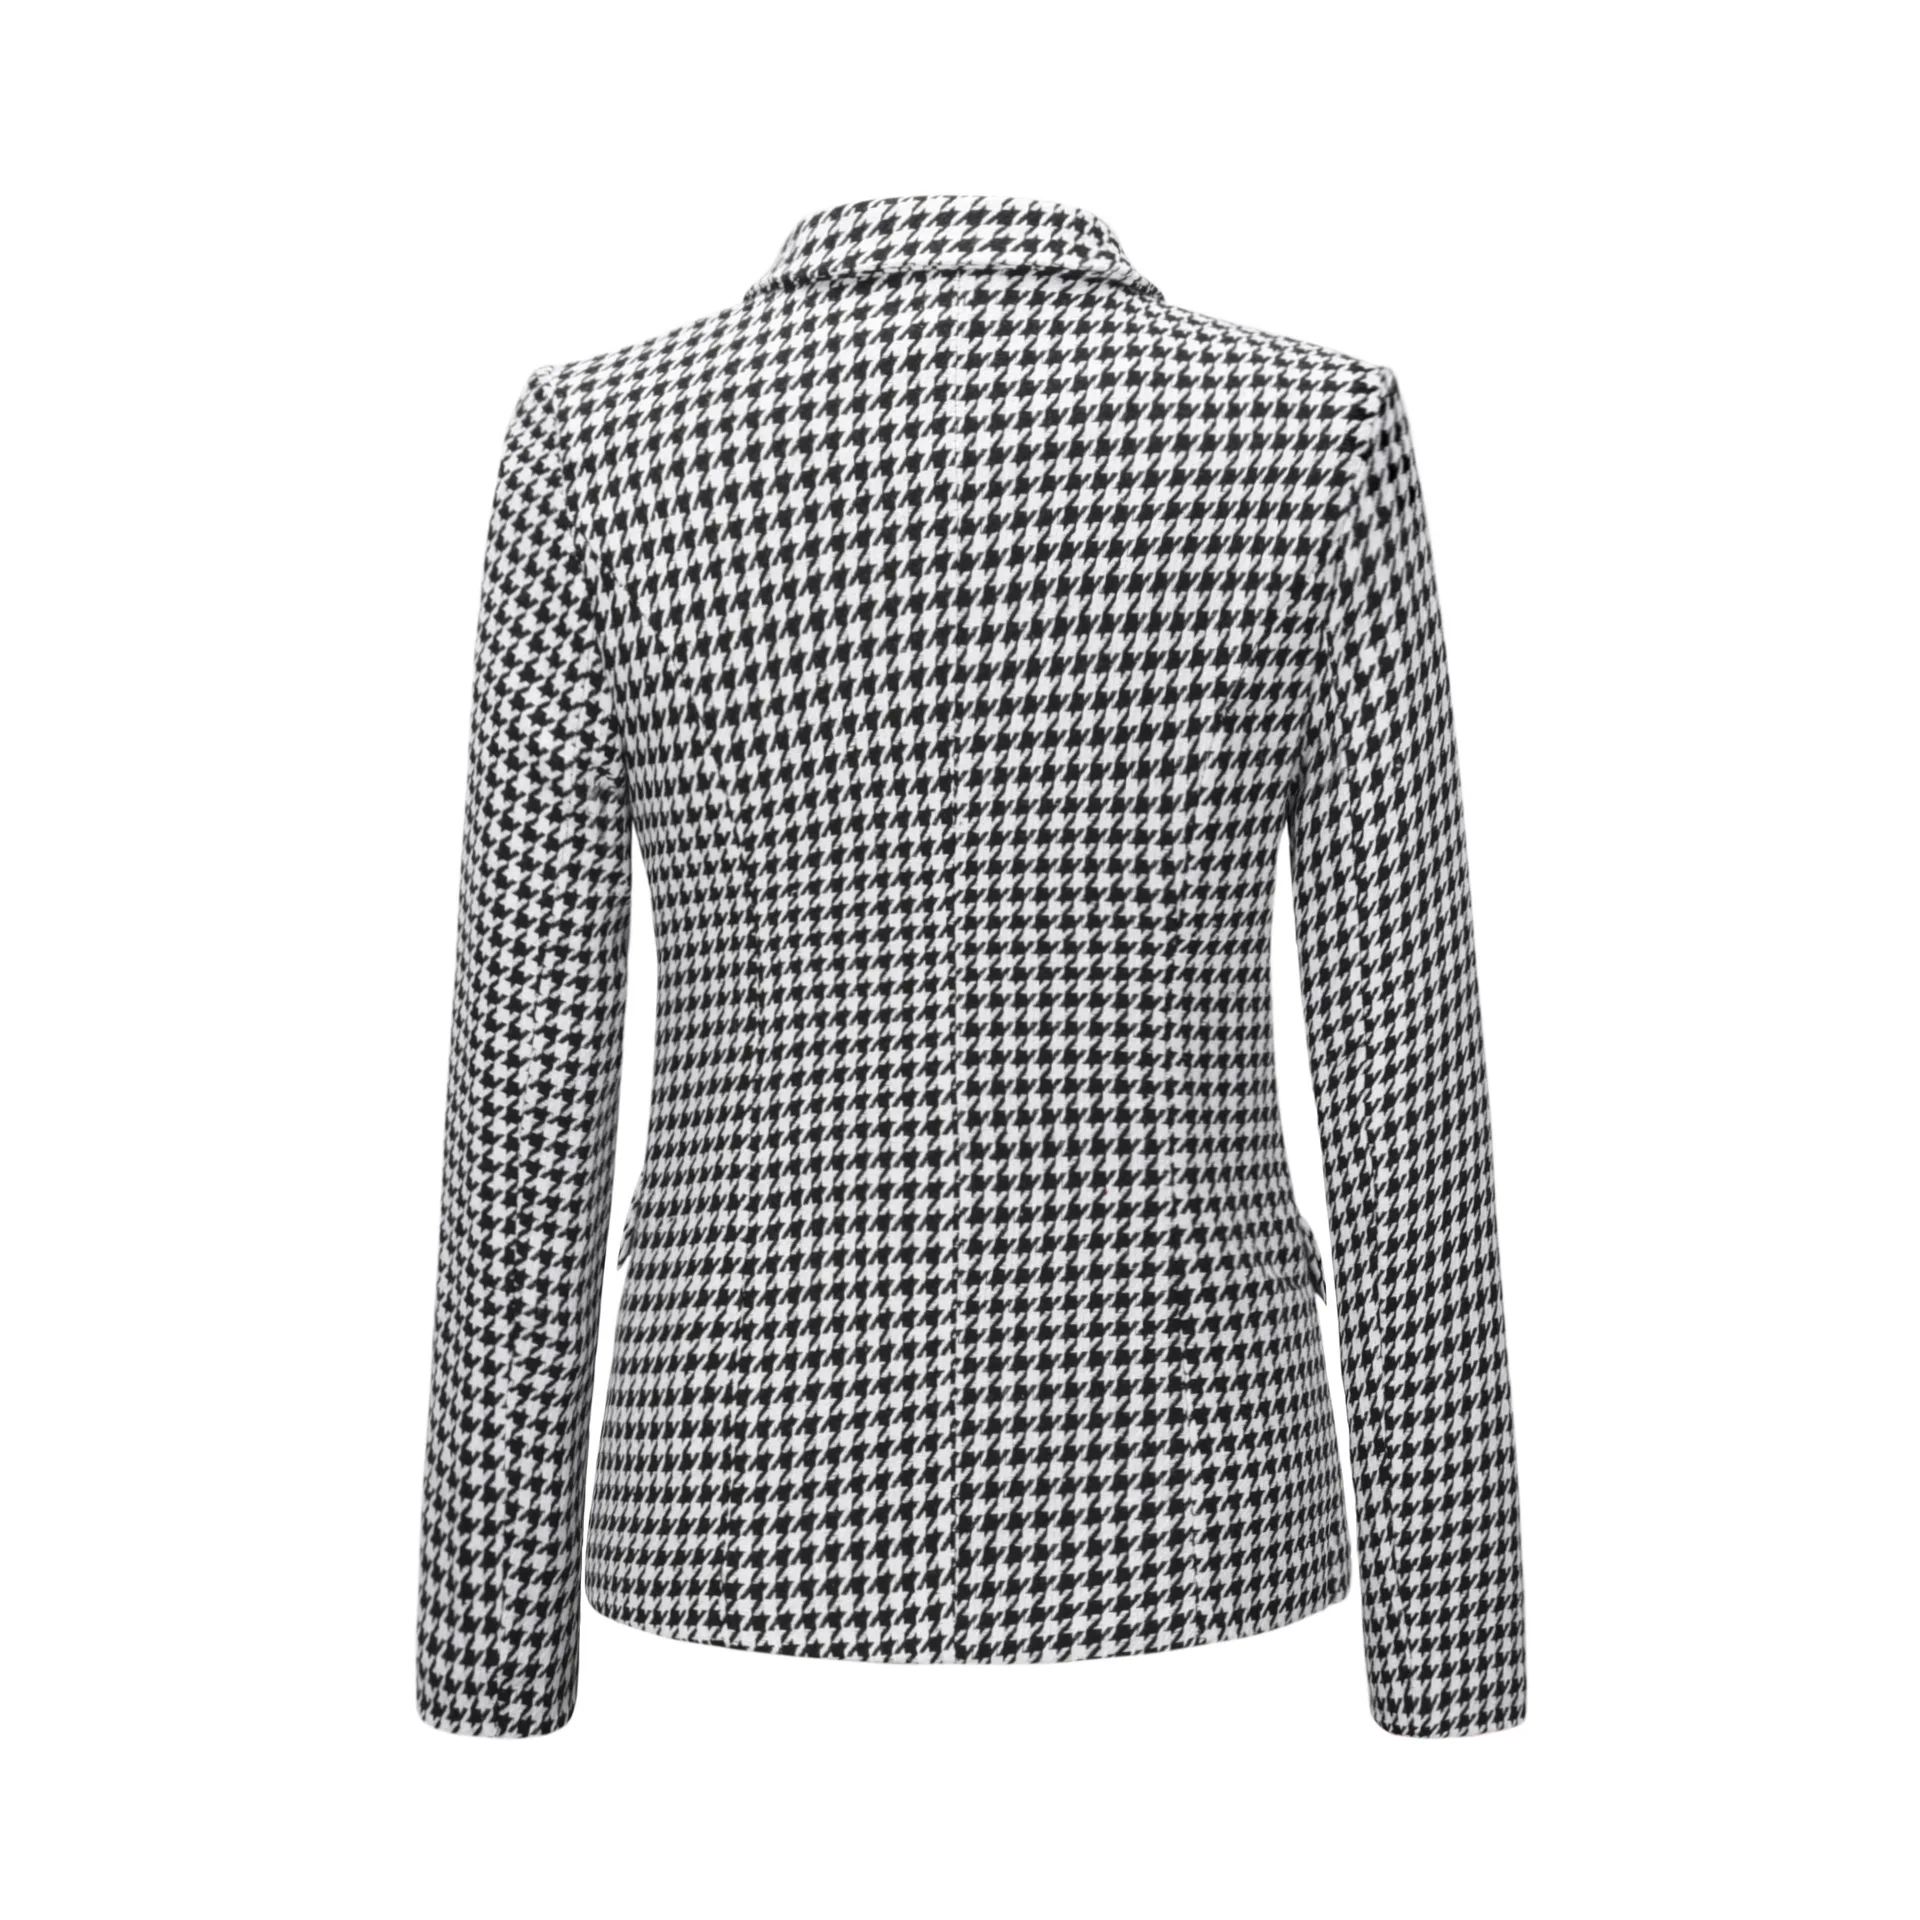 New style women's jacket autumn and winter small suit houndstooth suit fashion short double breasted womens black suit set